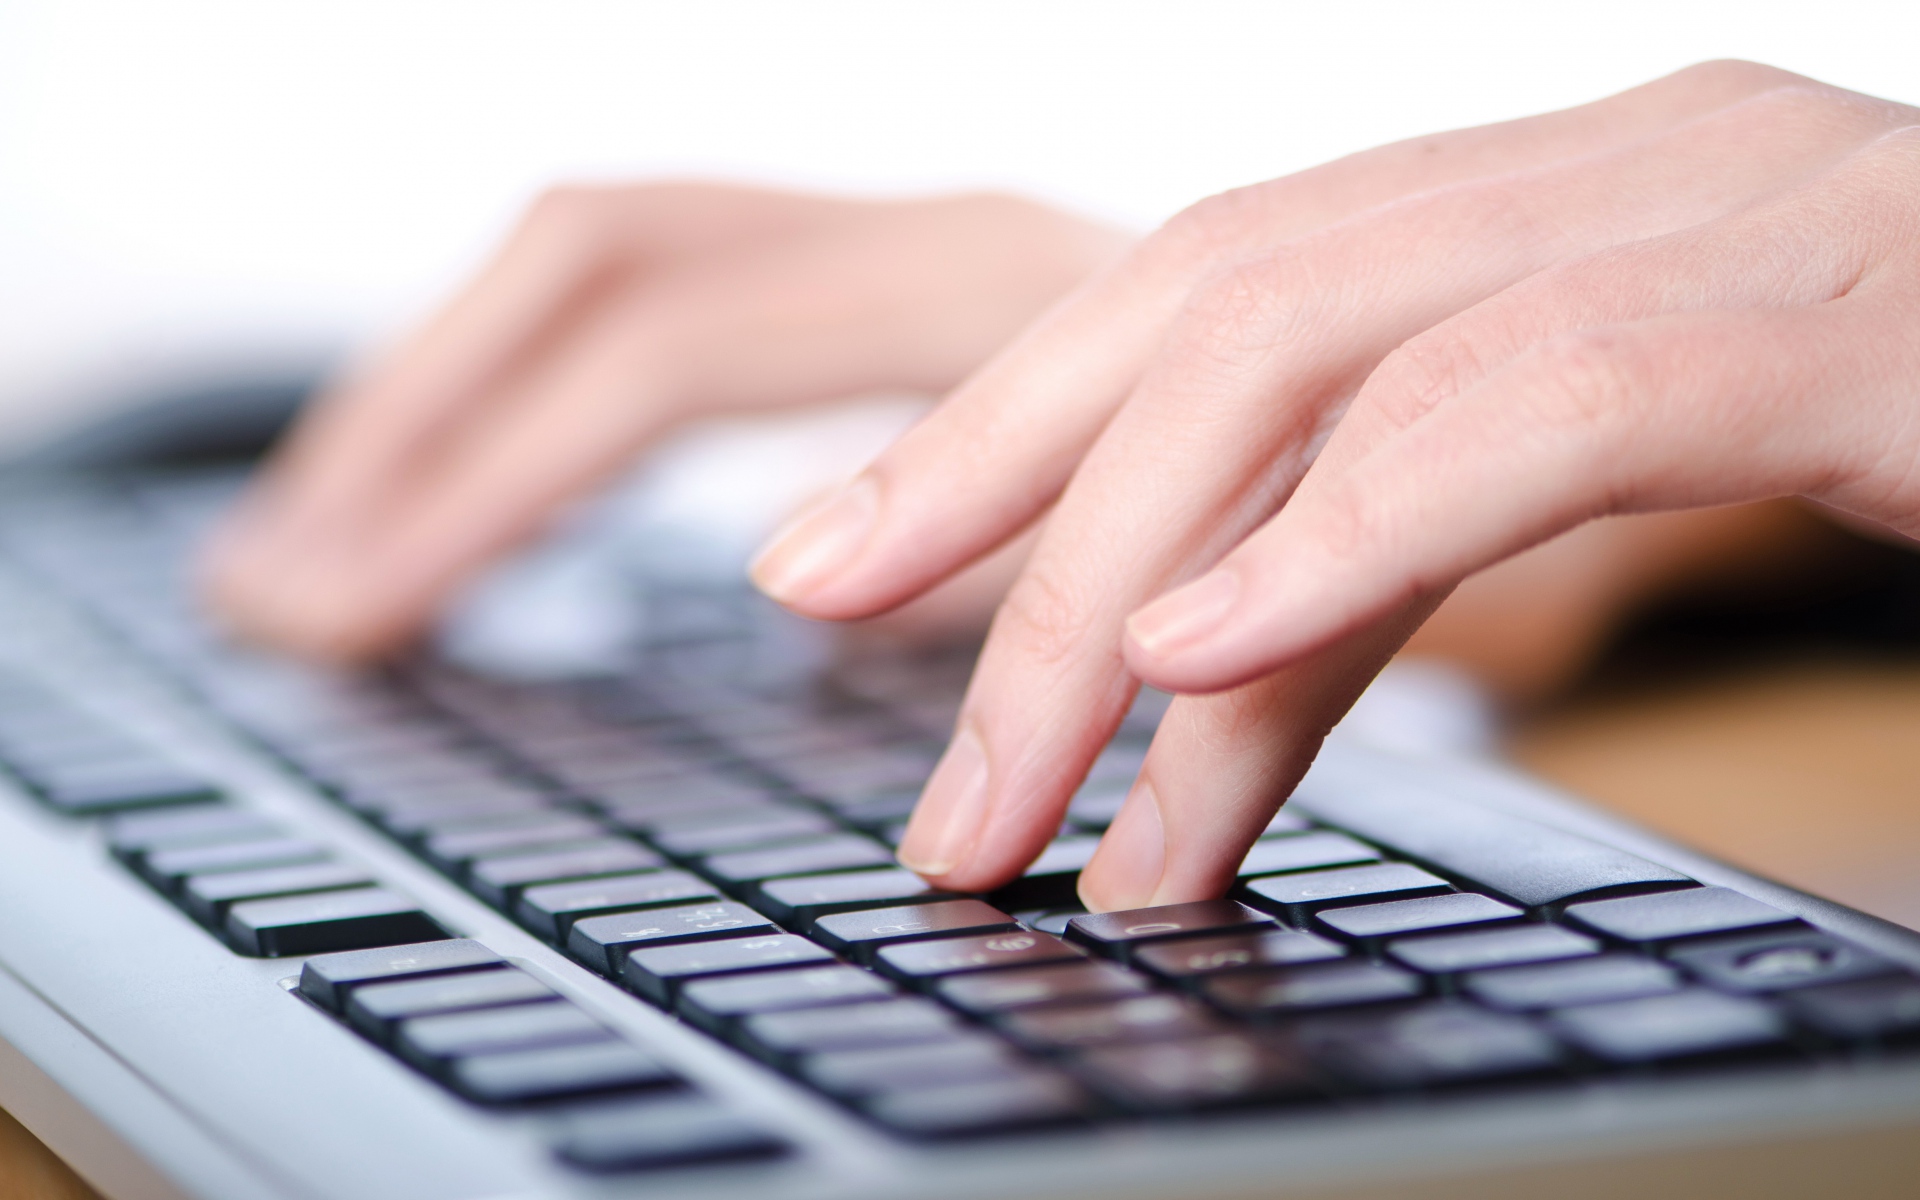 typing wallpaper,computer keyboard,finger,text,hand,typing